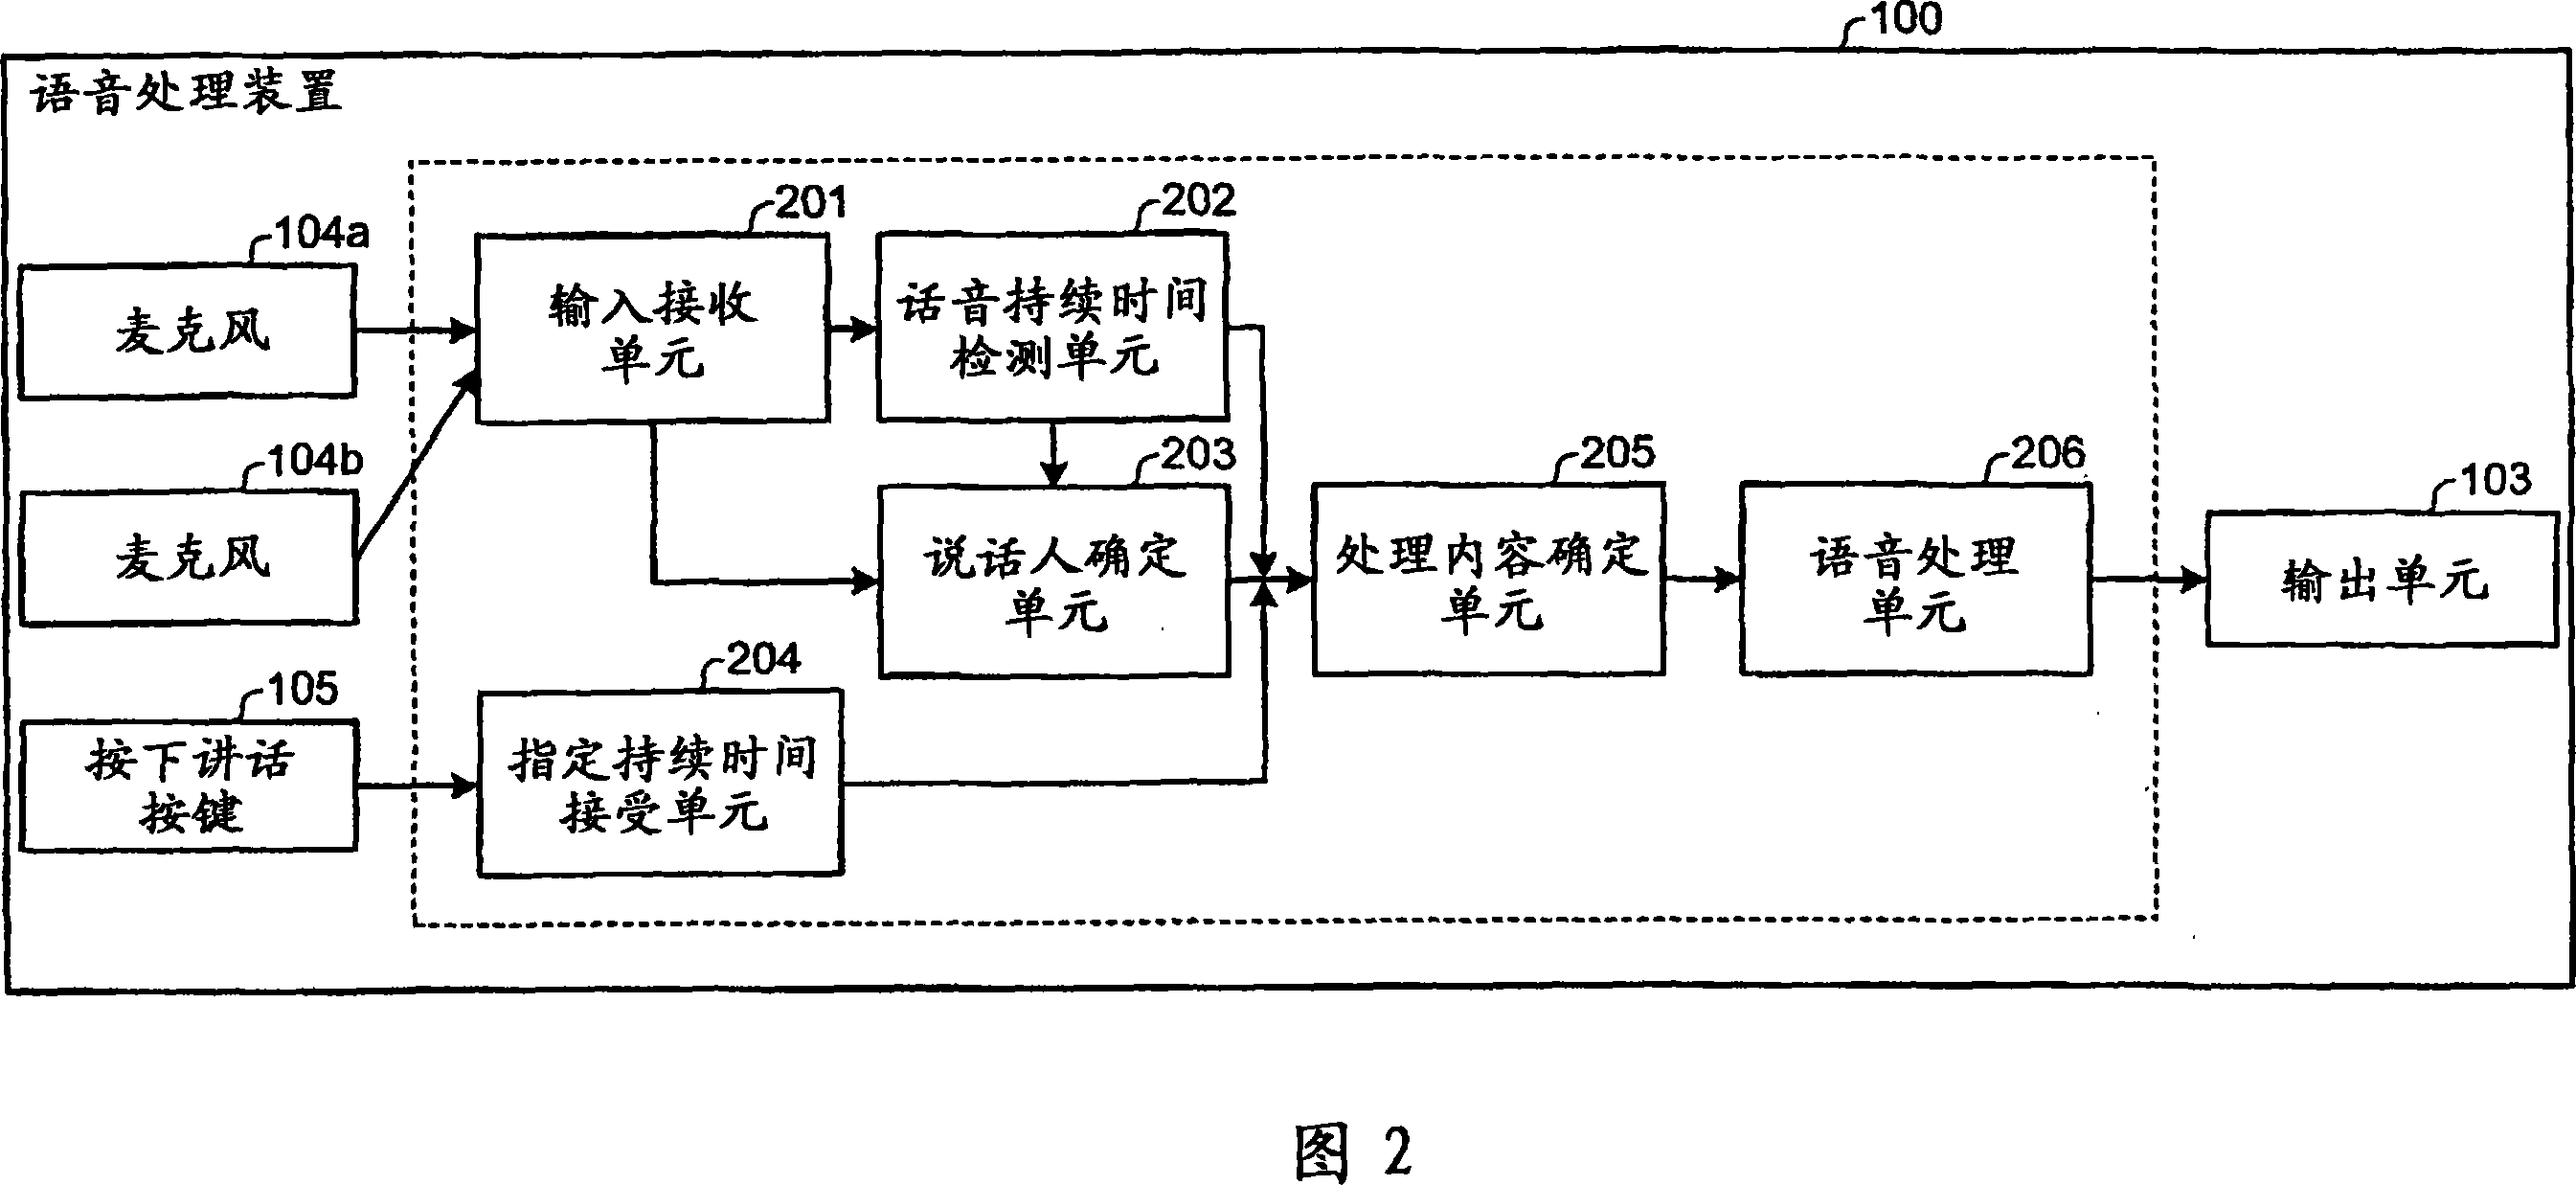 Apparatus and method for speech processing